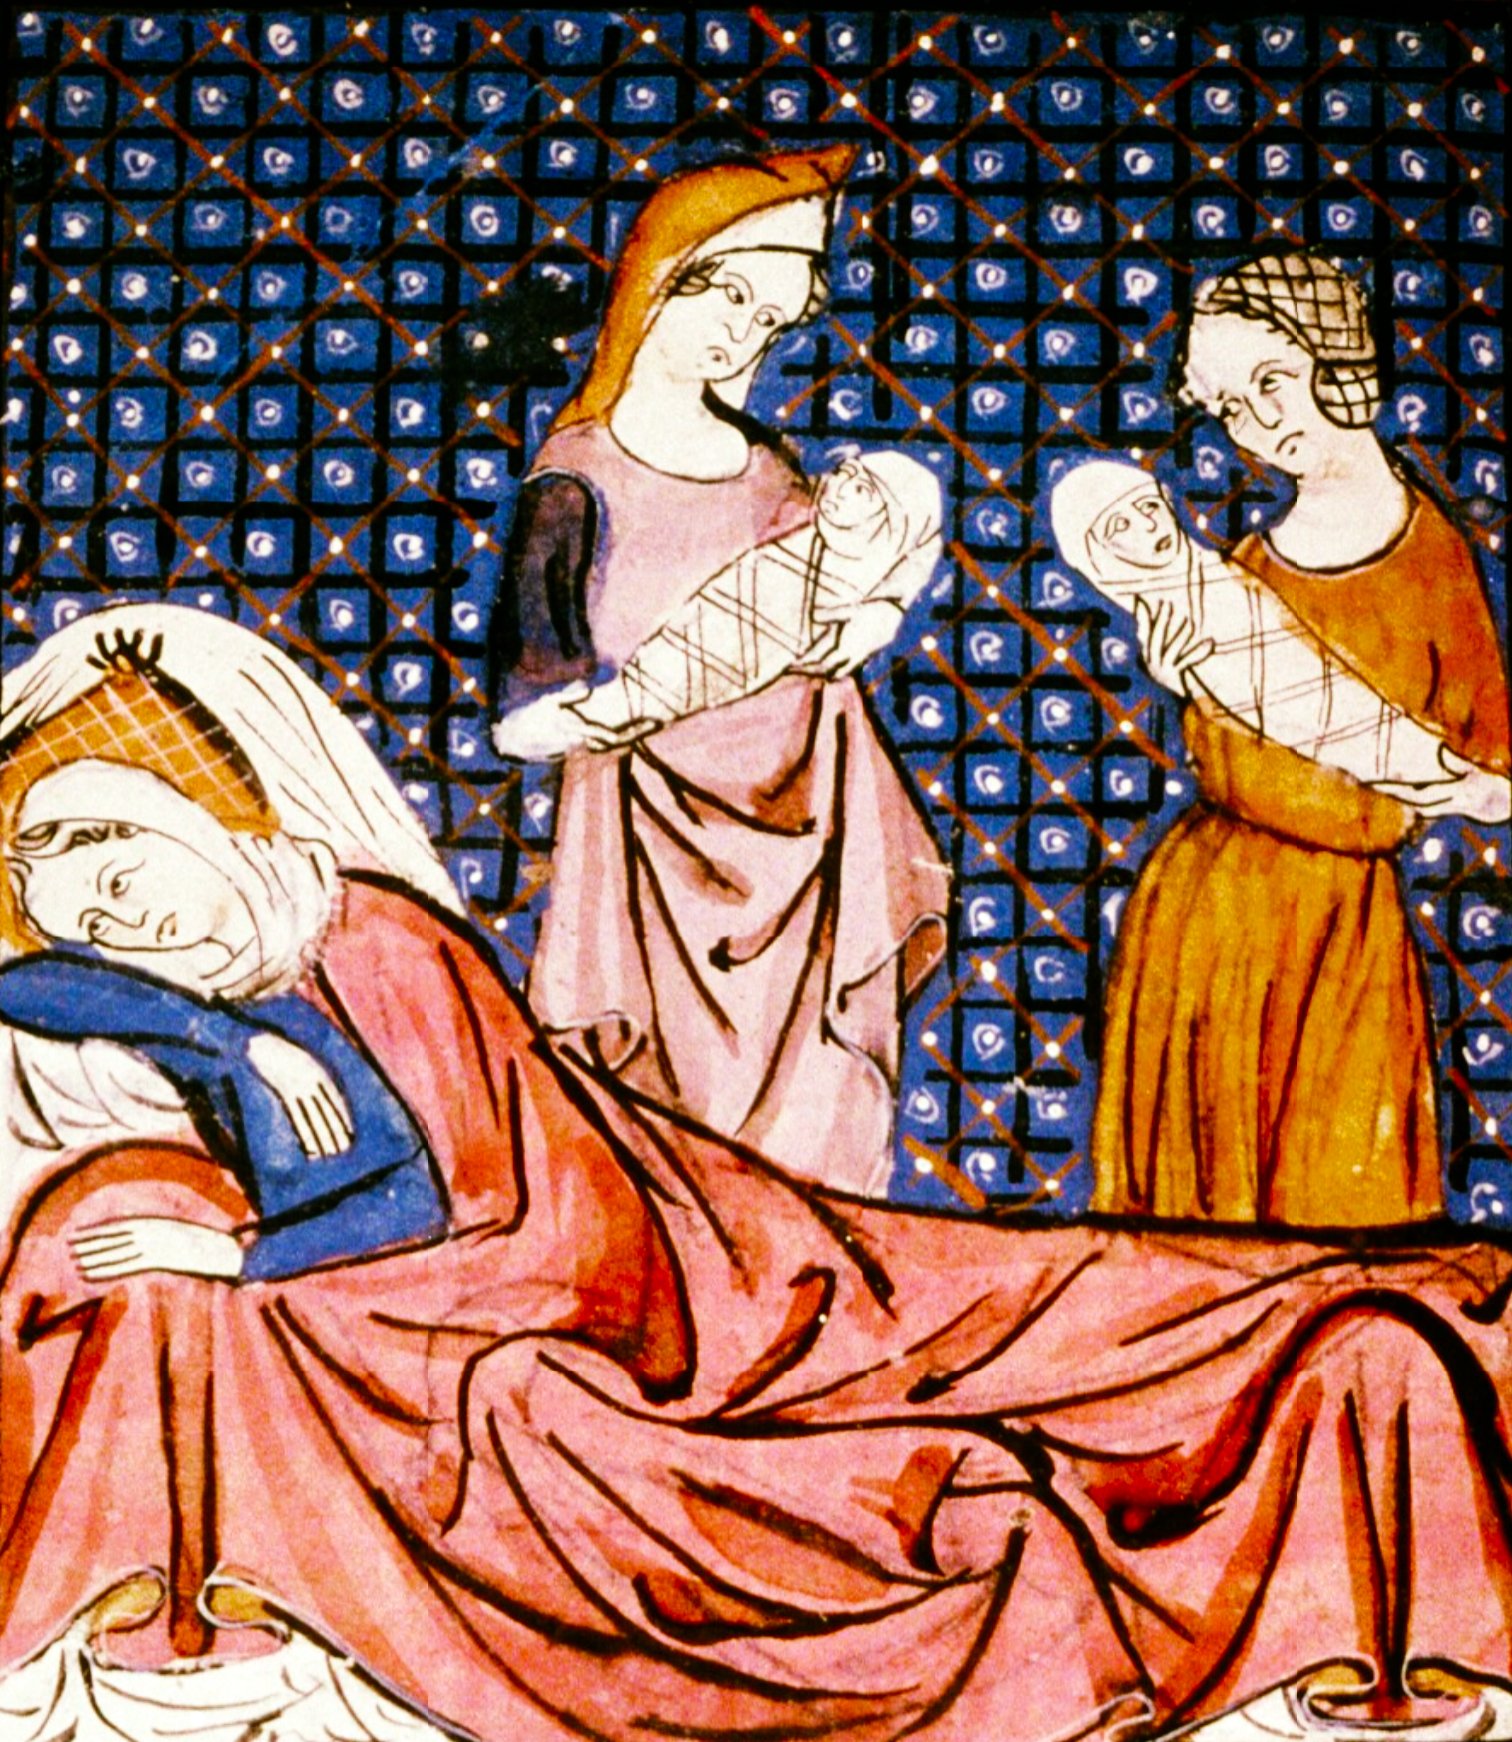 A medieval illustration from MS. Douce 211, dated between 1300-25, depicting a noble woman after childbirth. The noble woman lies in repose, draped in a rich pink gown with blue sleeves, her head resting on a cushion. To her right stands a midwife or nurse, dressed in a purple garment and headpiece, holding the swaddled newborn. Another woman in an orange dress stands nearby, holding another swaddled child.